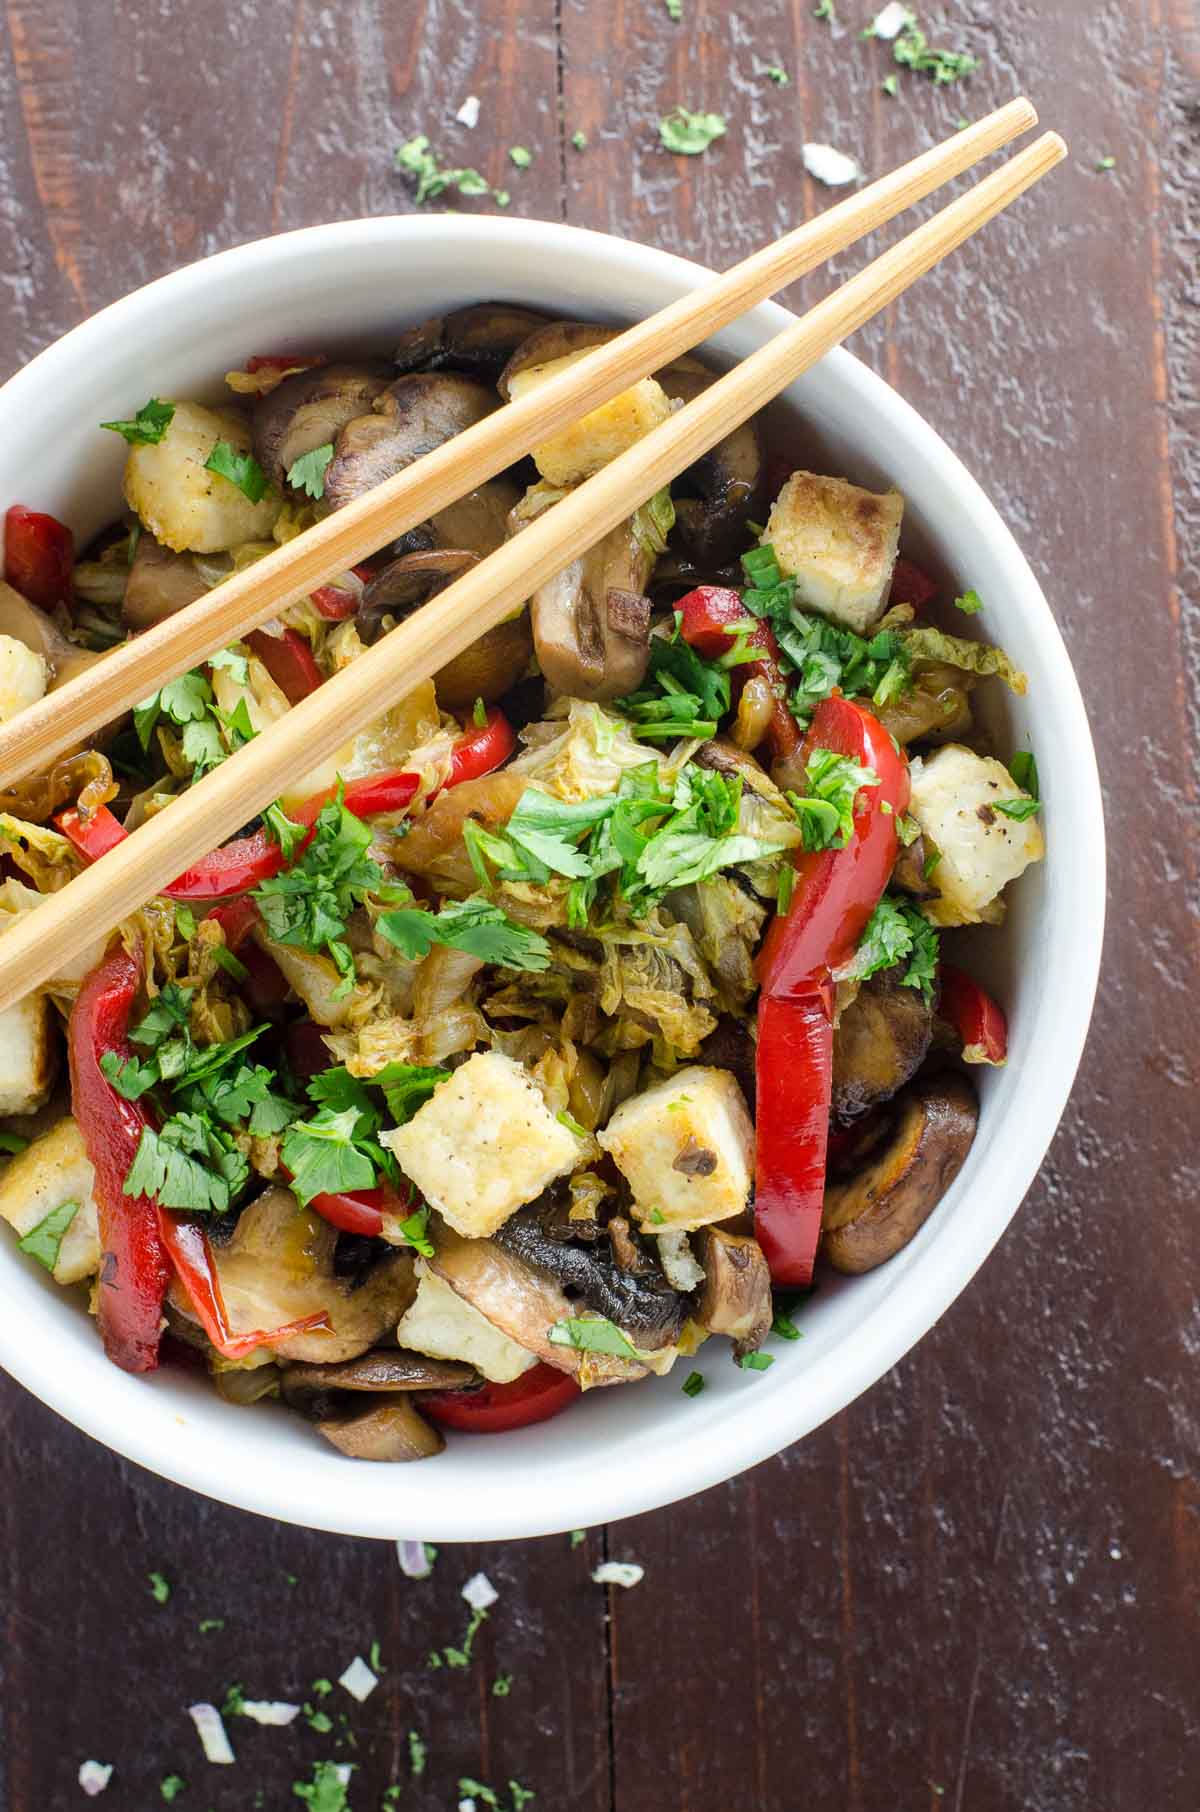 napa cabbage stir fry with salt and pepper tofu, mushrooms, and red bell pepper in a bowl with chopsticks